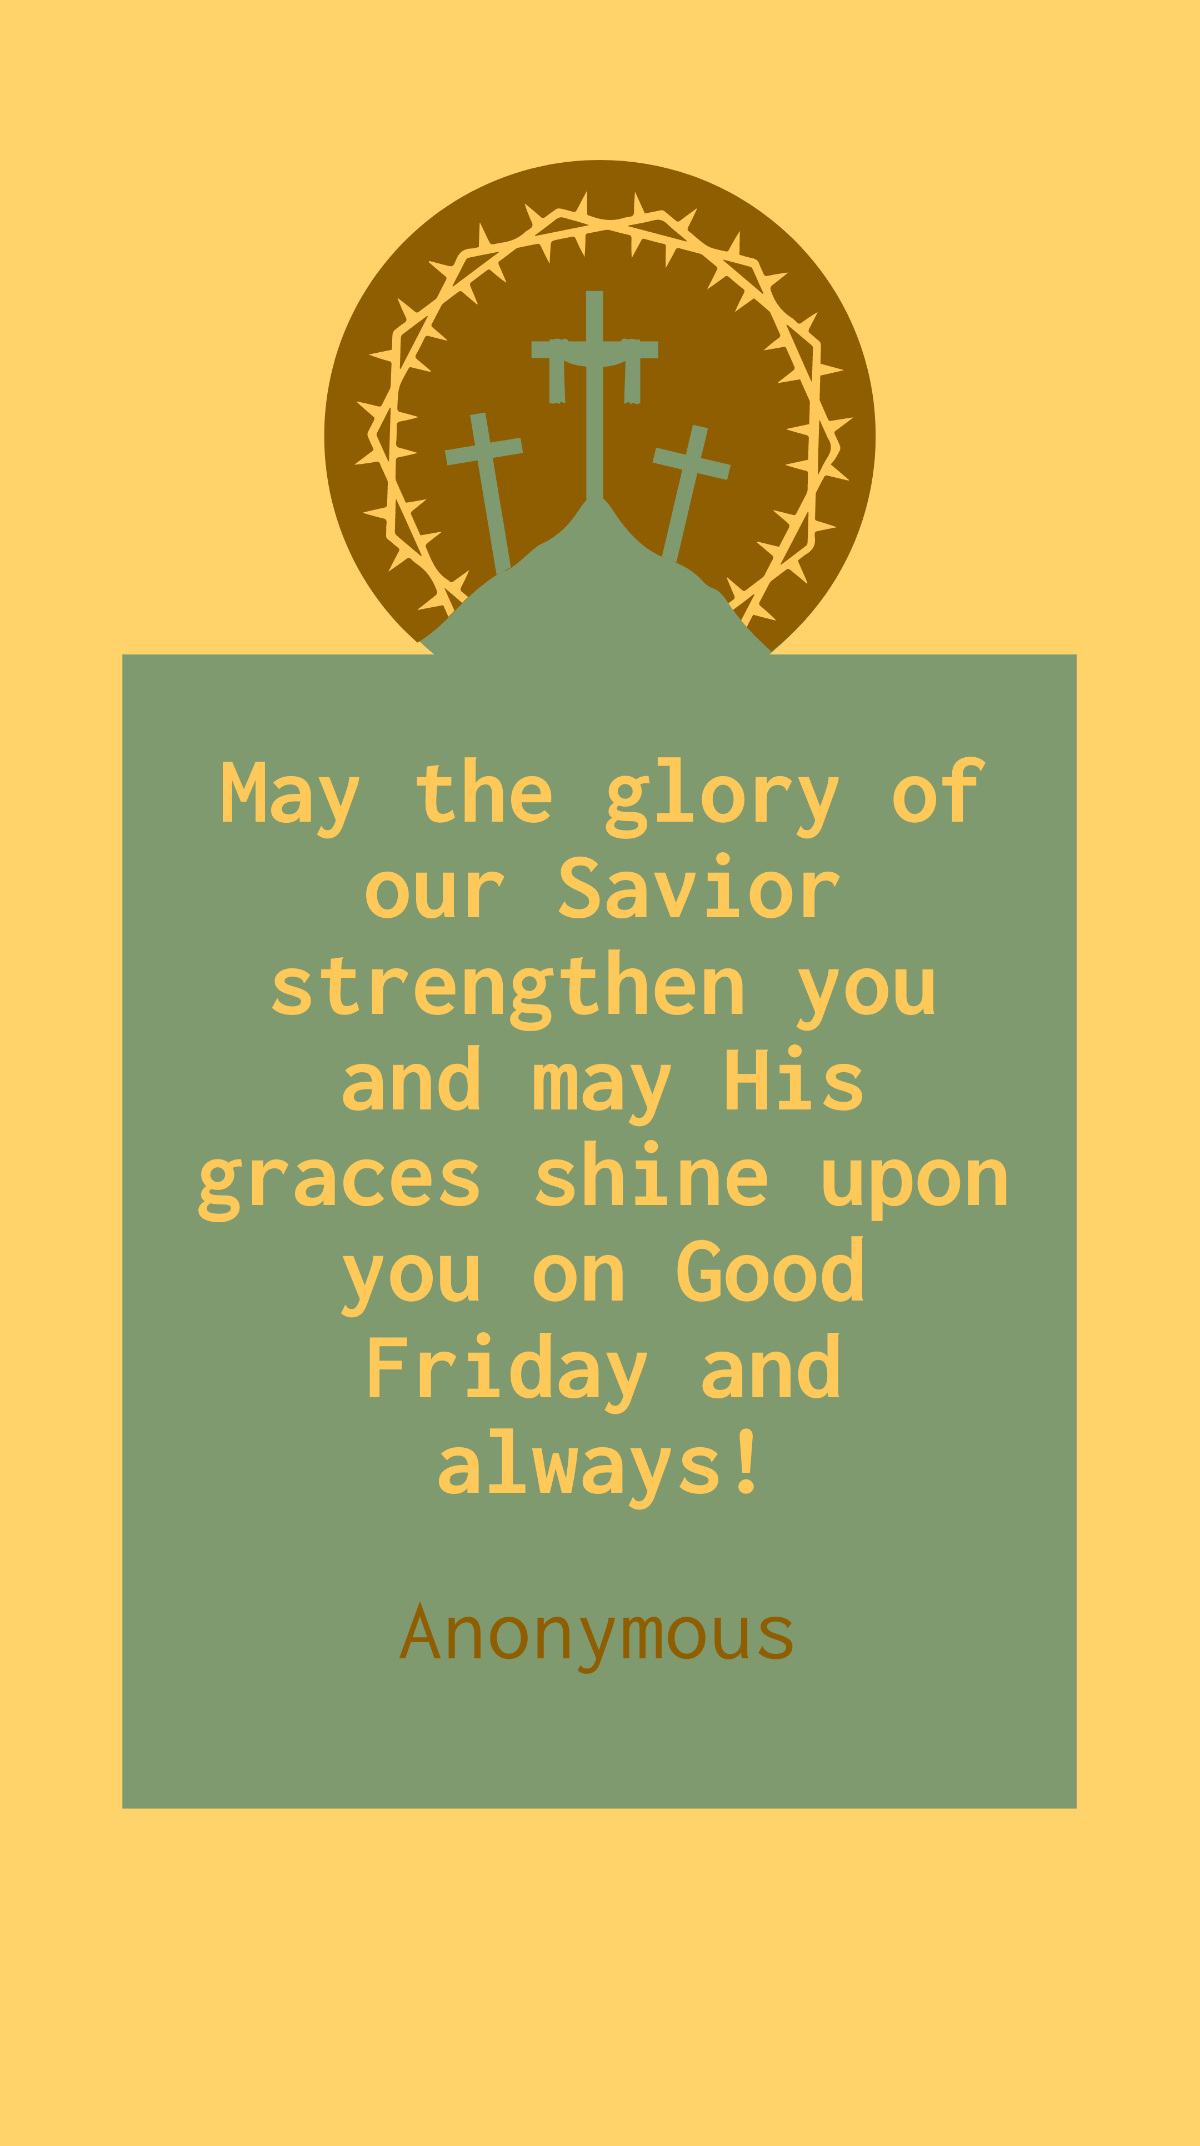 Anonymous - May the glory of our Savior strengthen you and may His graces shine upon you on Good Friday and always! Template